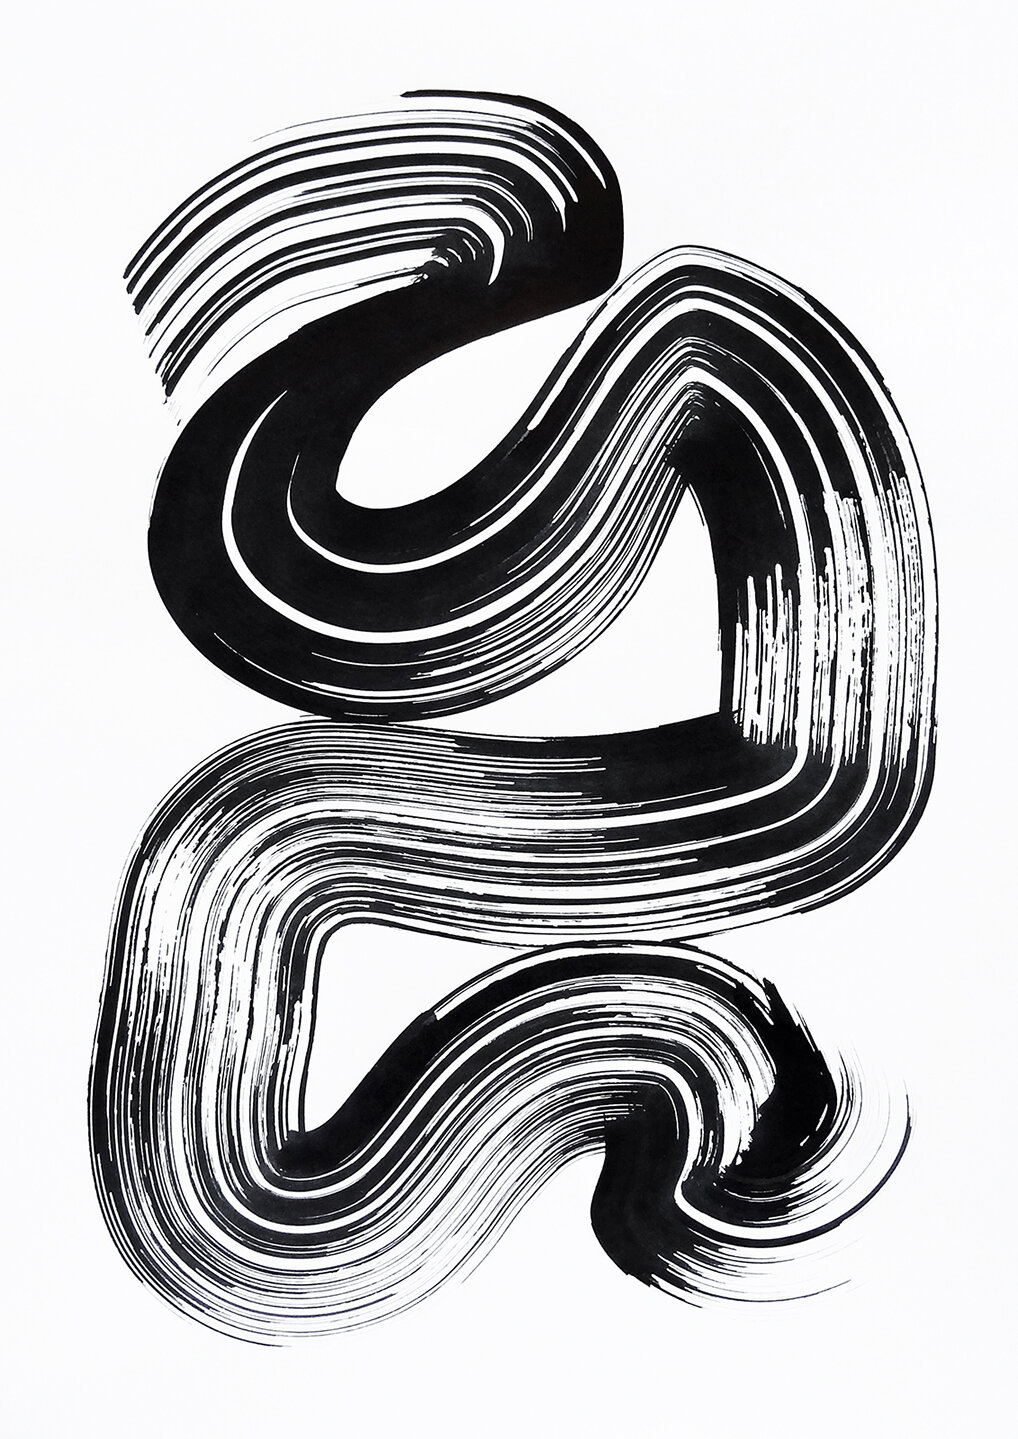  Untitled, 2020 strokes series calligraphy ink on paper 42,0 x 29,7 cm (21-20) 